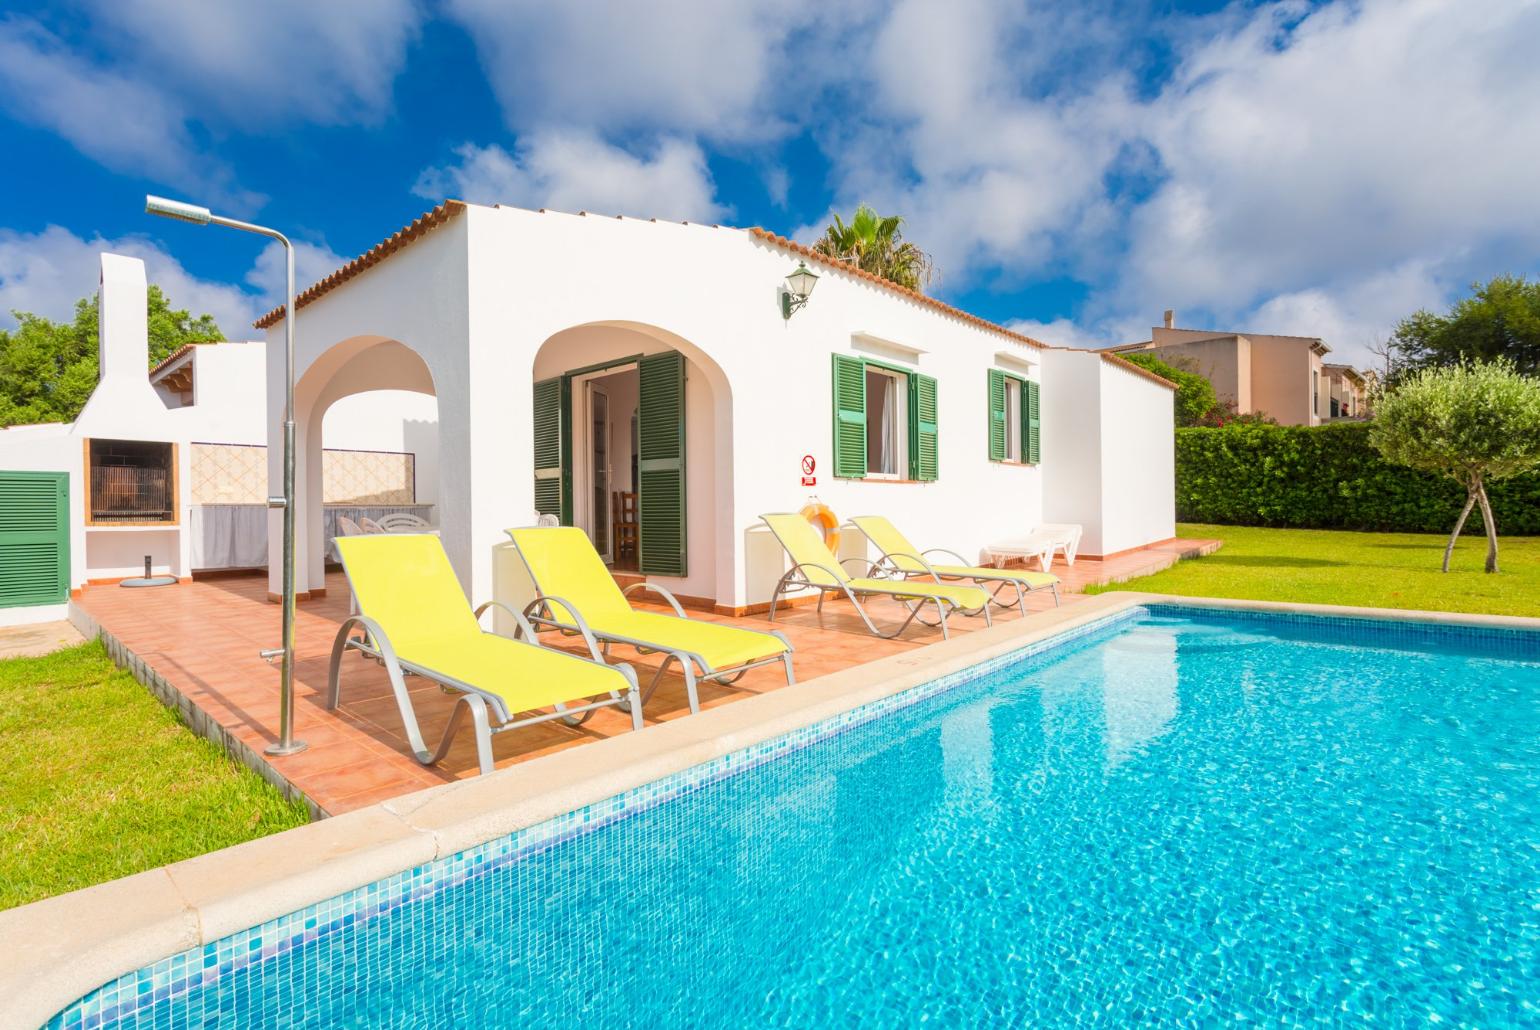 Beautiful villa with private pool, partially sheltered terrace, and lawn